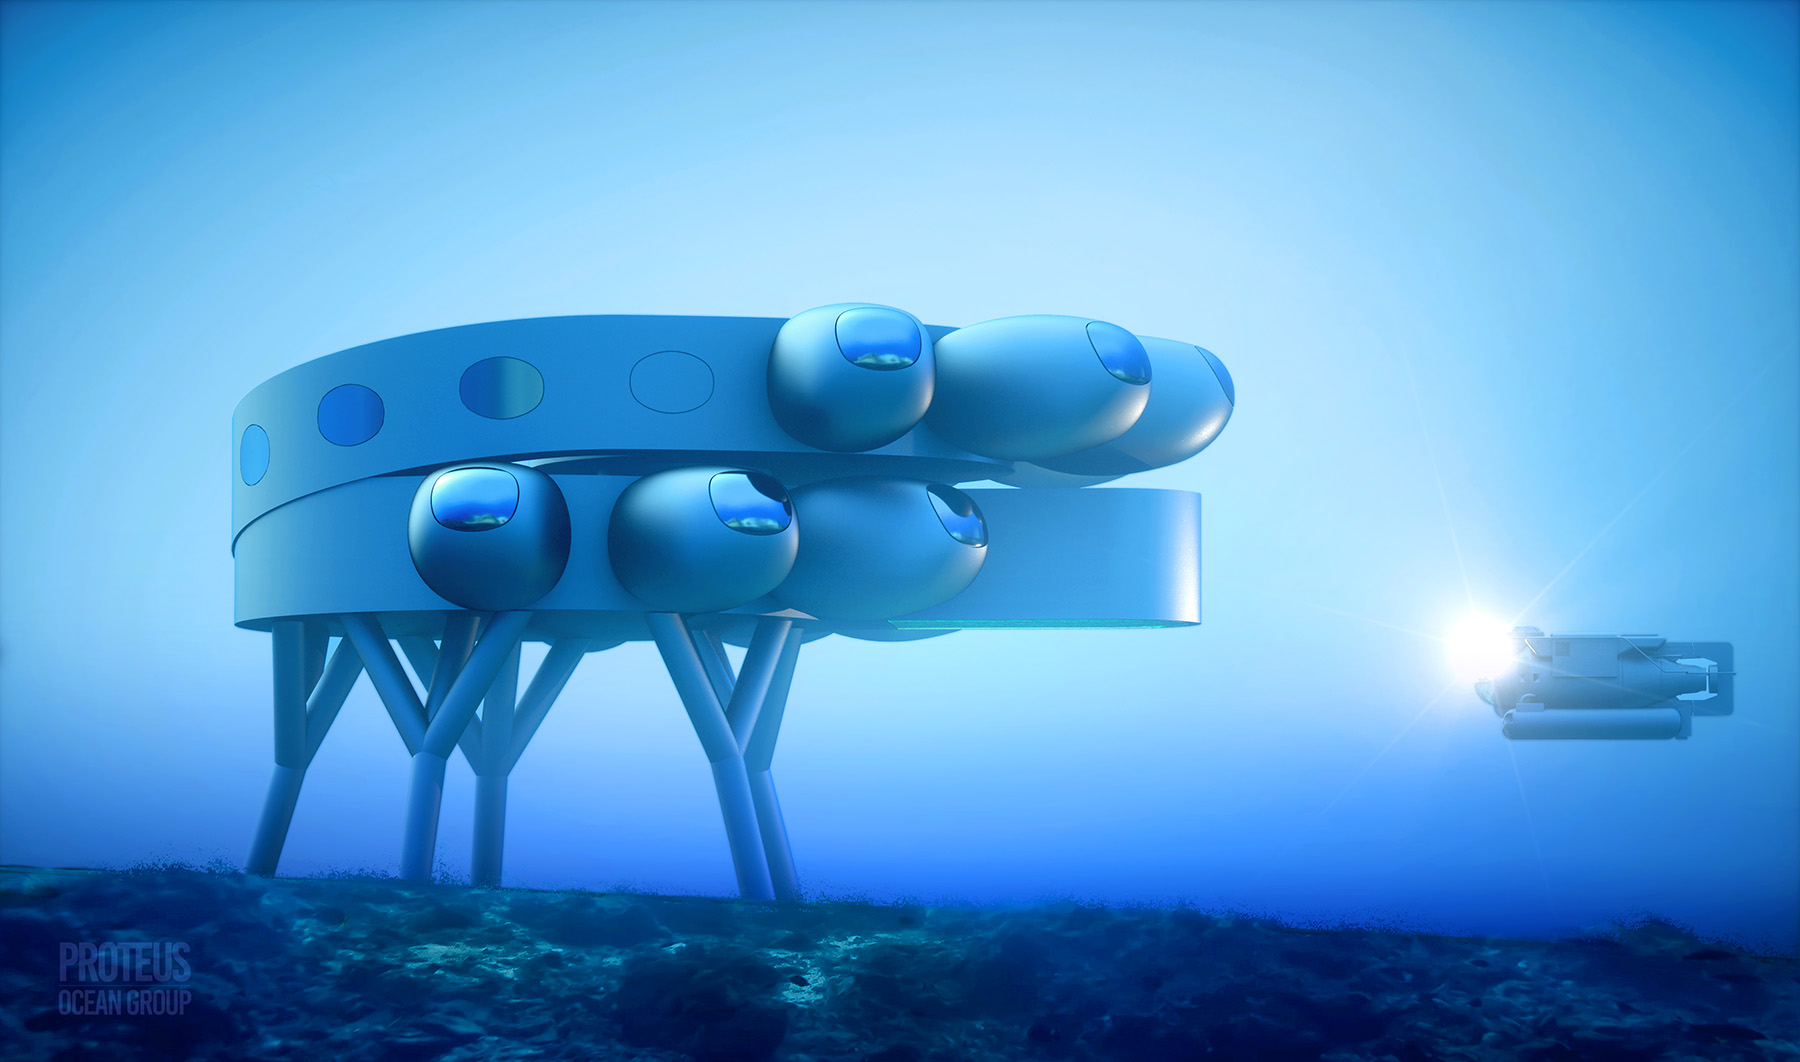 The rendering shows a modular underwater laboratory with multiple stories and large protuberances. 